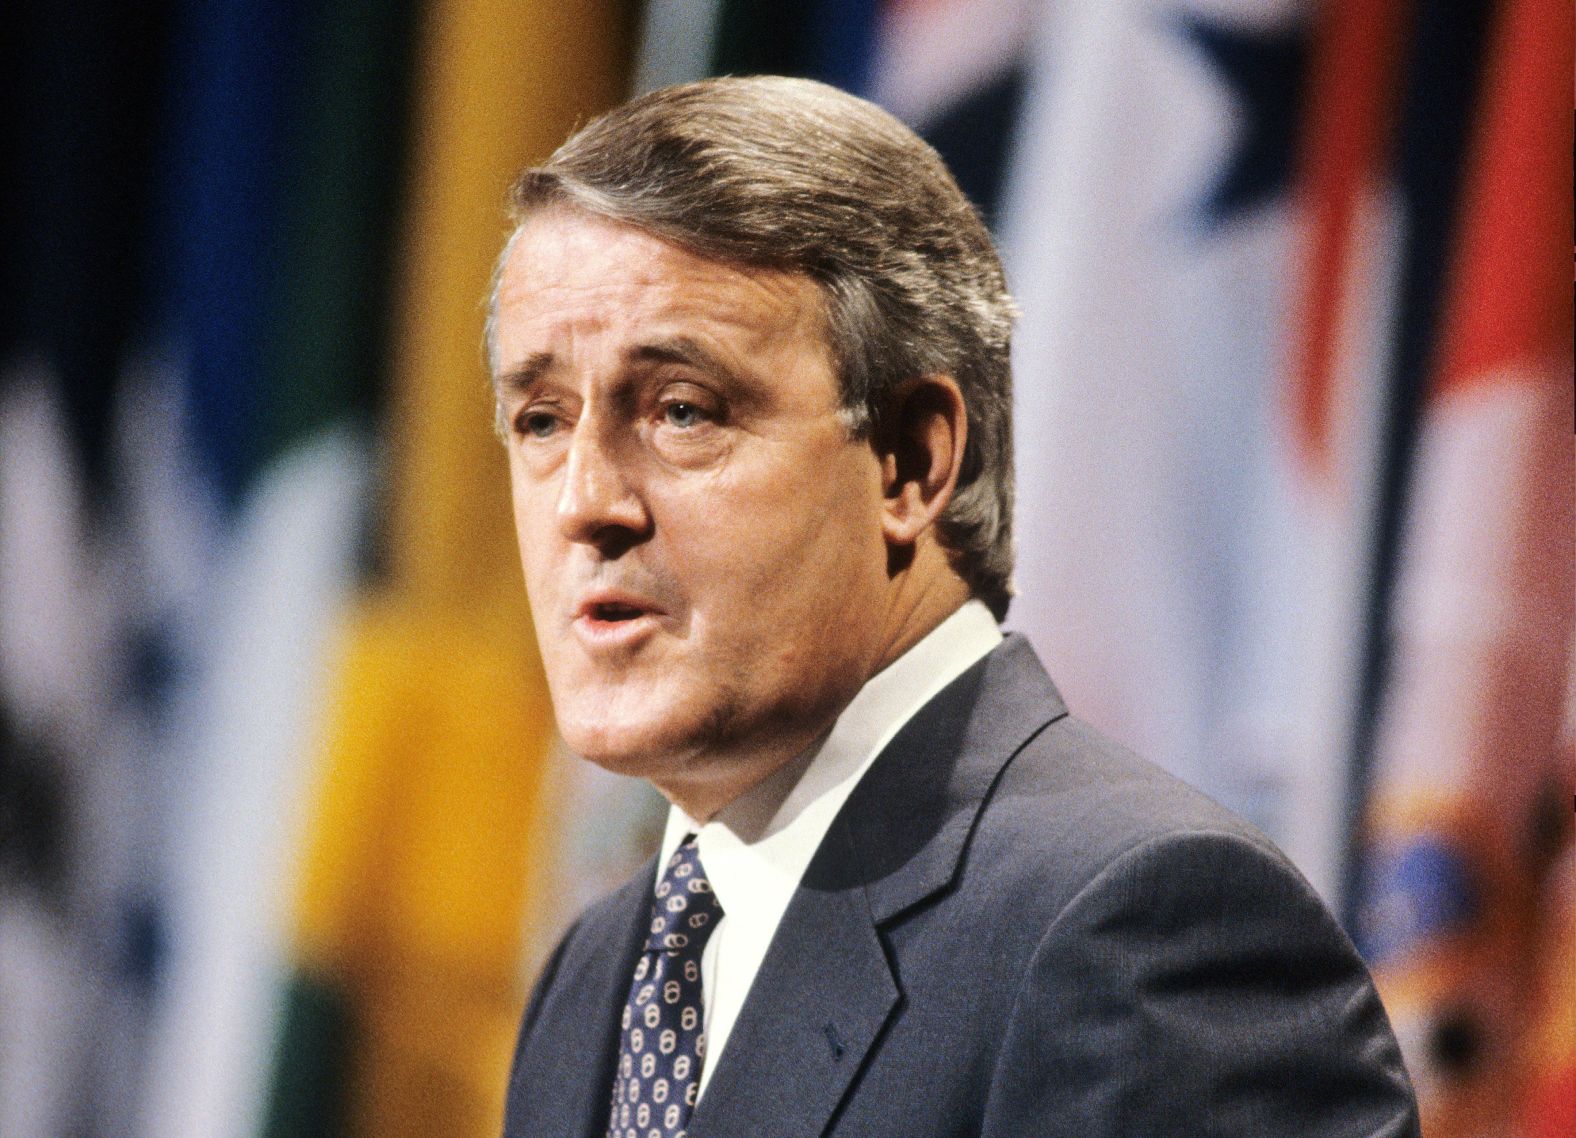 Former Canadian Prime Minister <a href="https://www.cnn.com/2024/02/29/americas/brian-mulroney-obit/index.html" target="_blank">Brian Mulroney</a> died at the age of 84, according to Canadian media reports citing his daughter's social media post on February 29.